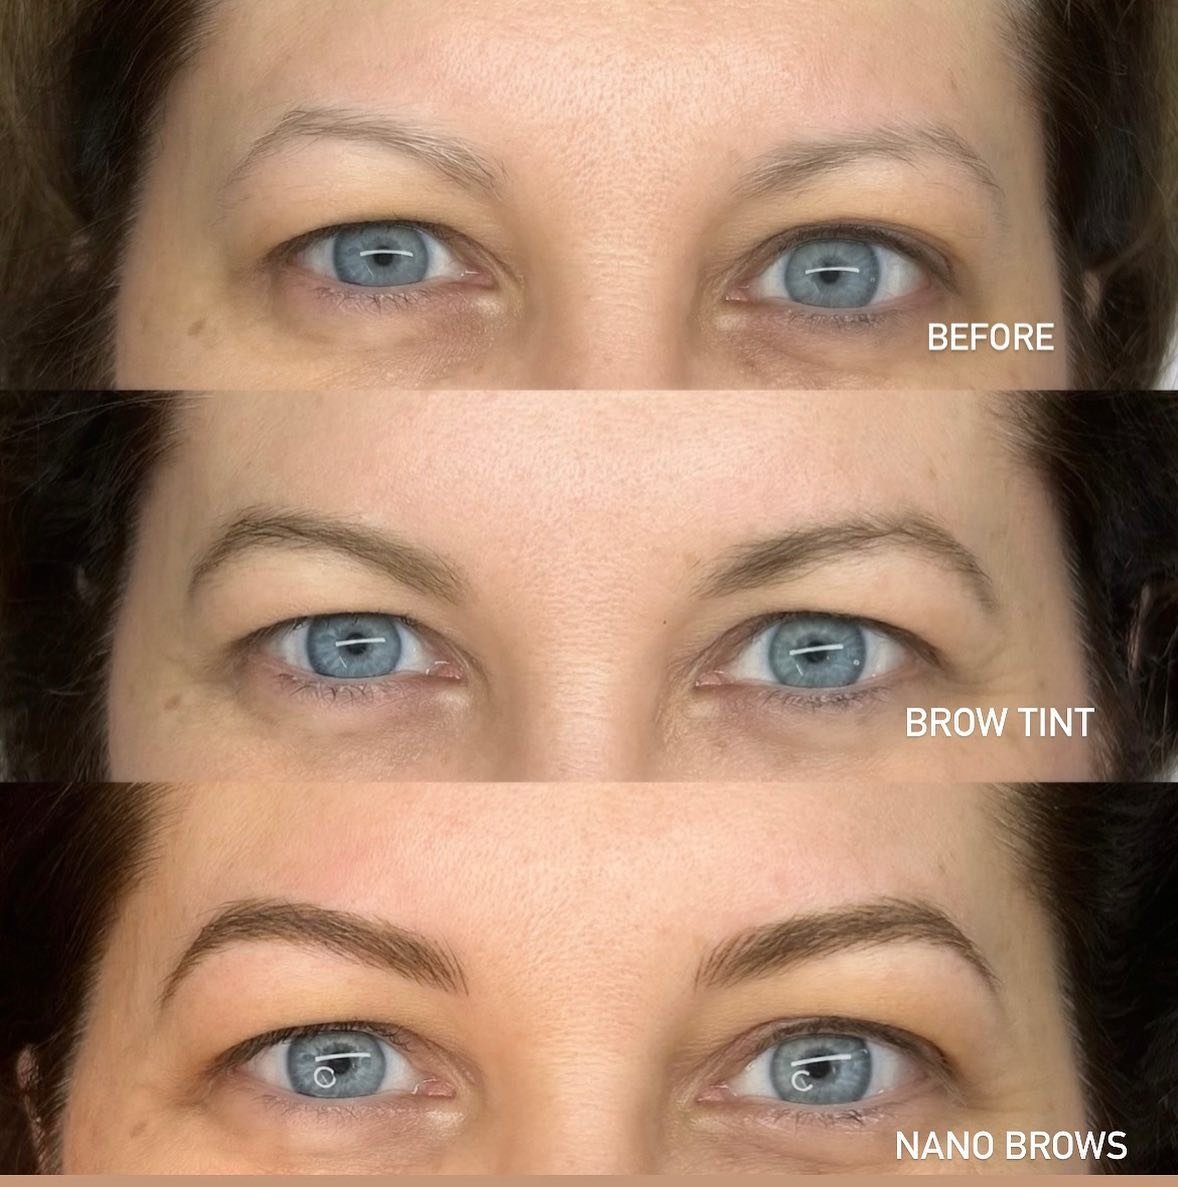 Full service eyebrow re-vamp! Grooming and tinting the existing eyebrows is a great way to maximize what you naturally have before tattooing additional hair strokes. Nano Brows is the optimal service choice for most people. This precise technique del